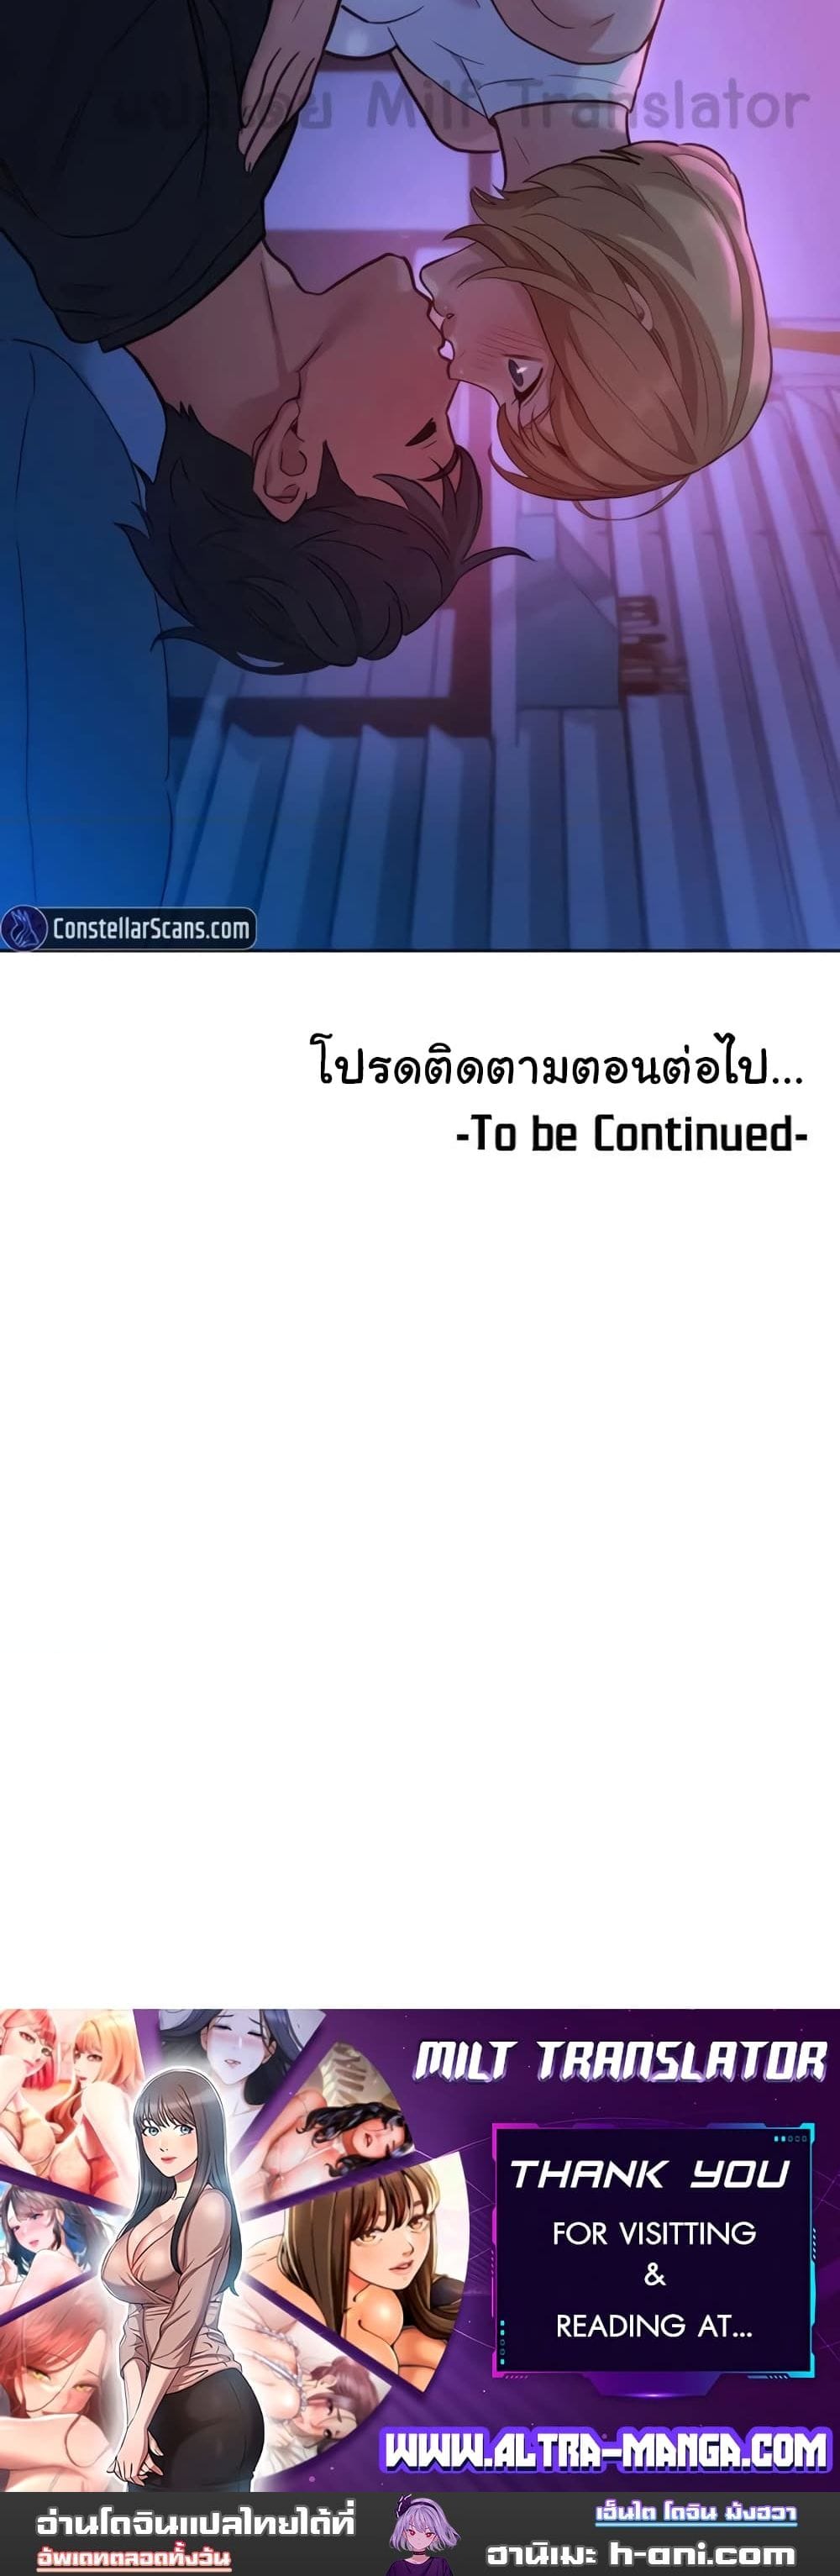 Let’s Hang Out from Today ตอนที่ 25 ภาพ 15